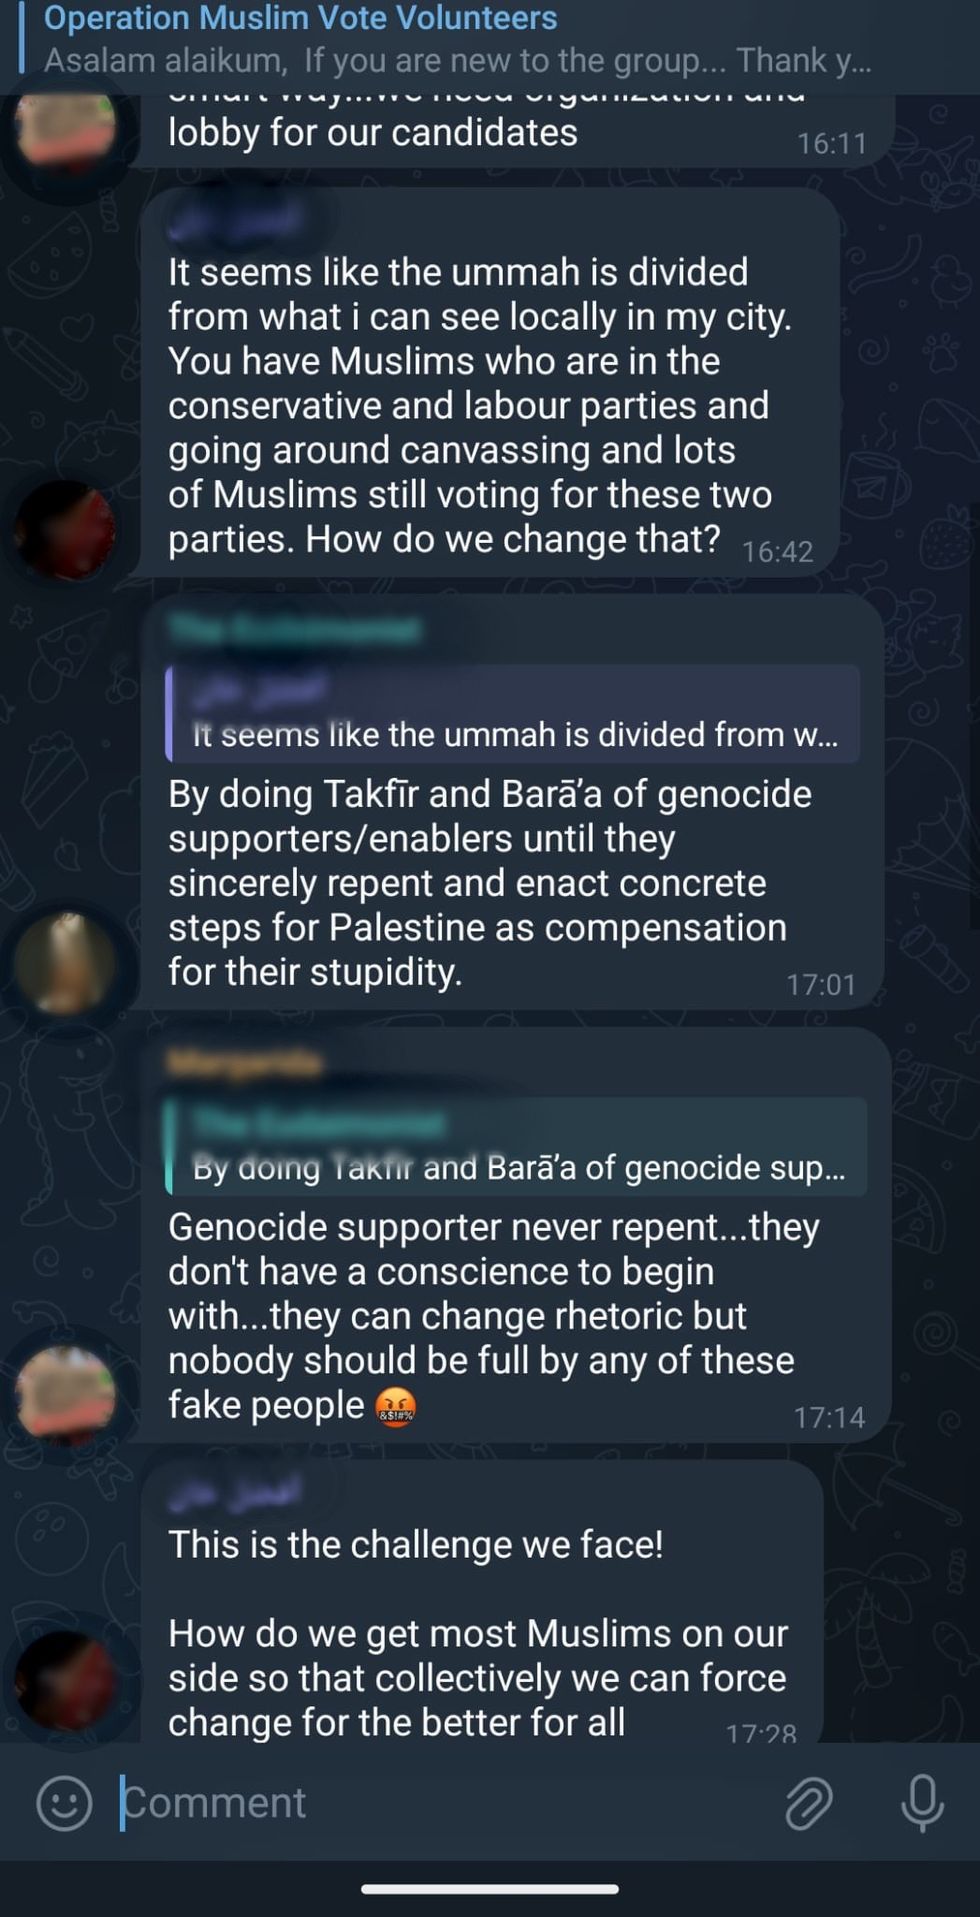 Text messages from Muslim Vote activists obtained by GB News